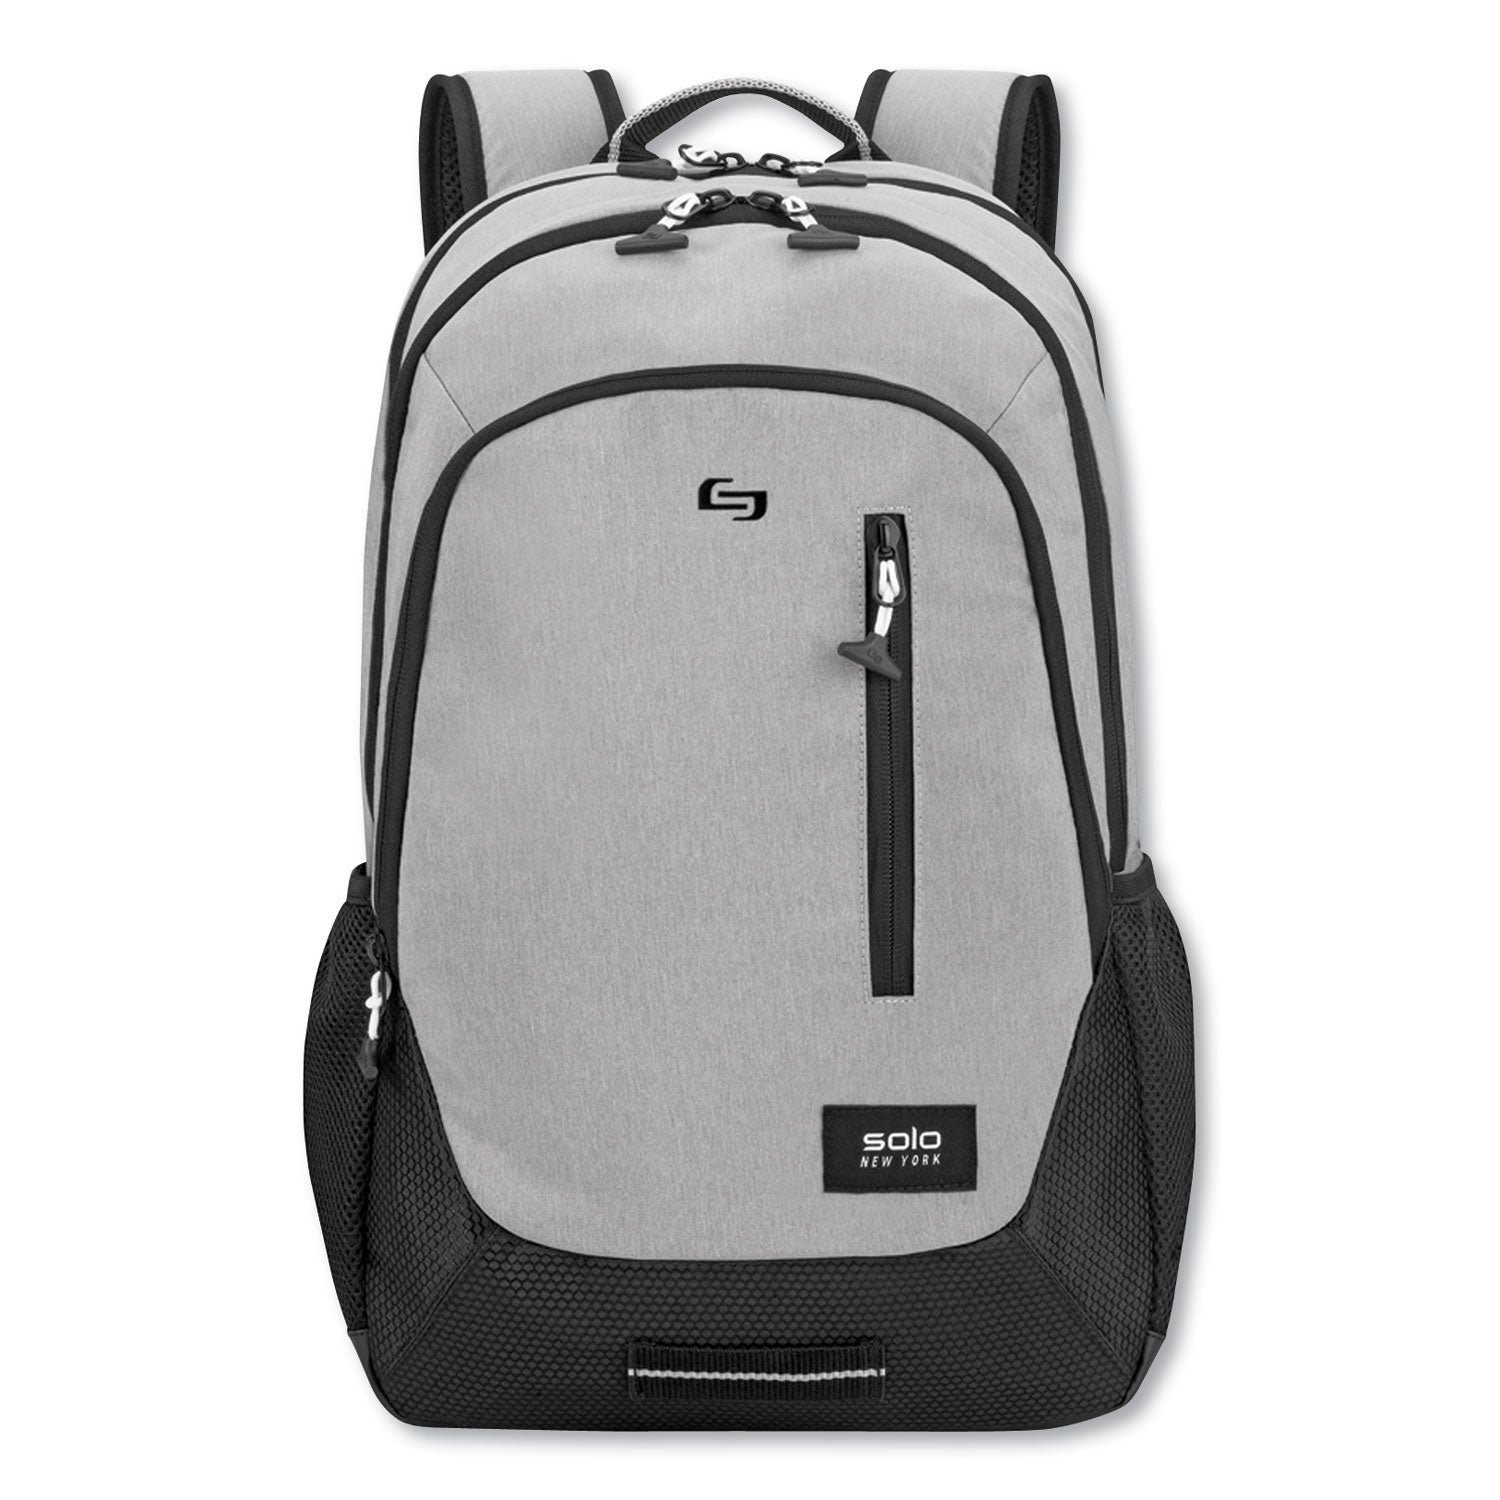 region-backpack-fits-devices-up-to-156-nylon-polyester-13-x-5-x-19-light-gray_uslvar70410 - 1